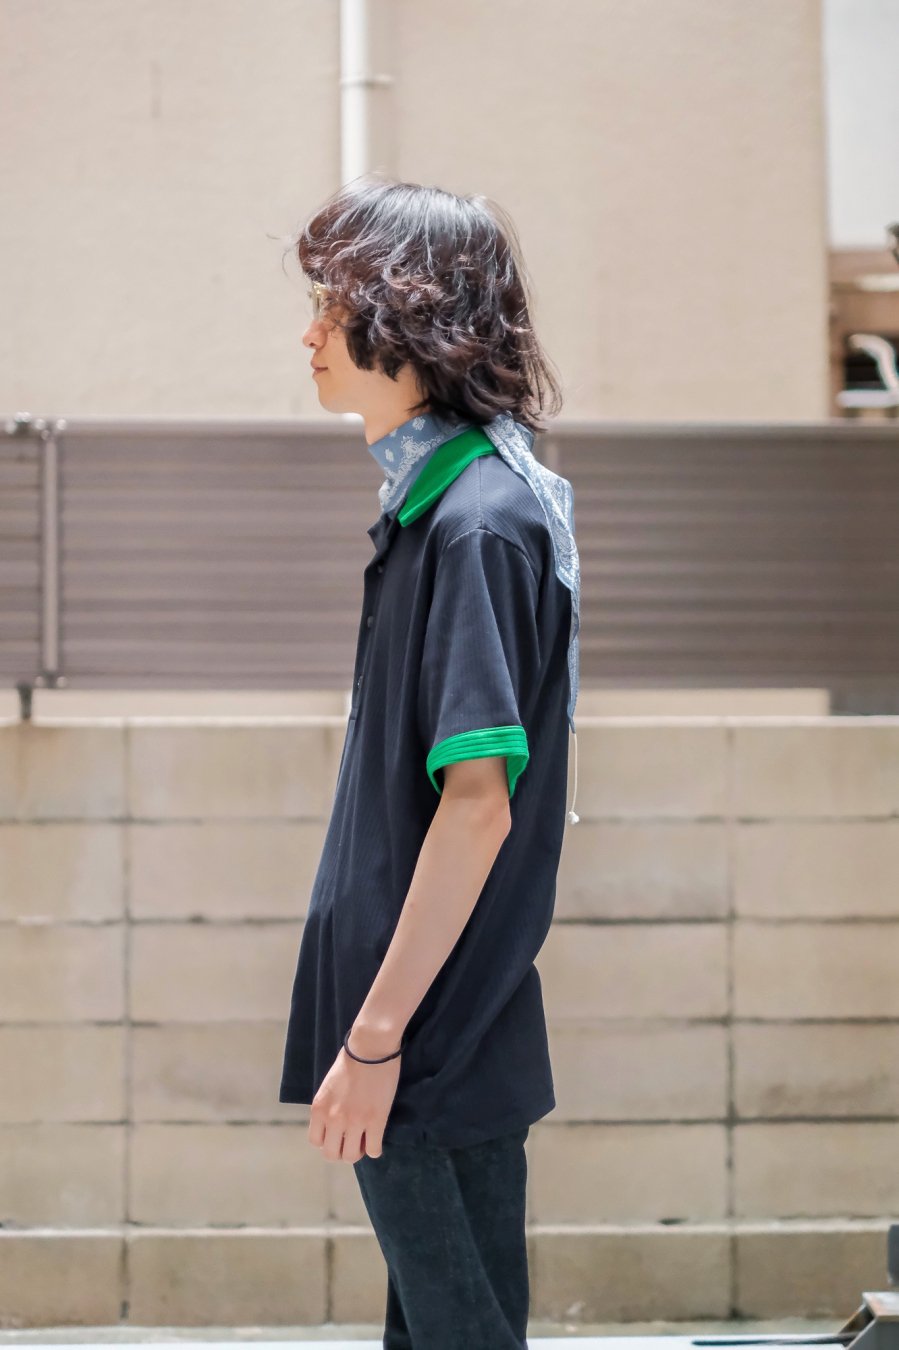 LITTLEBIG（リトルビッグ）のOpen Collared Polo BLACK or NAVY 